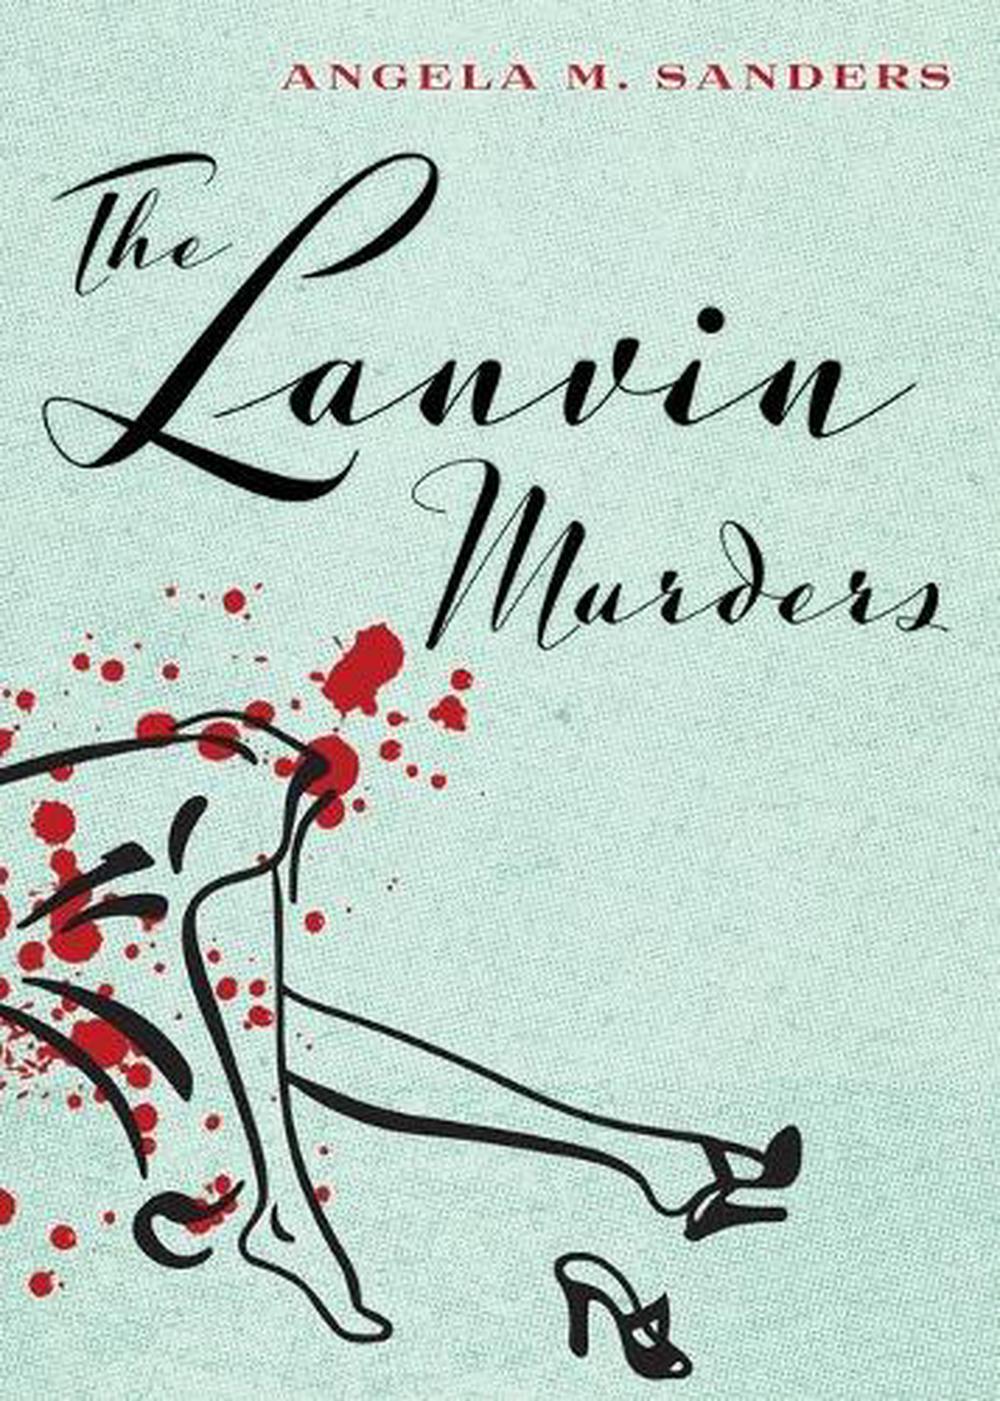 The Lanvin Murders by Angela M. Sanders (English) Paperback Book Free